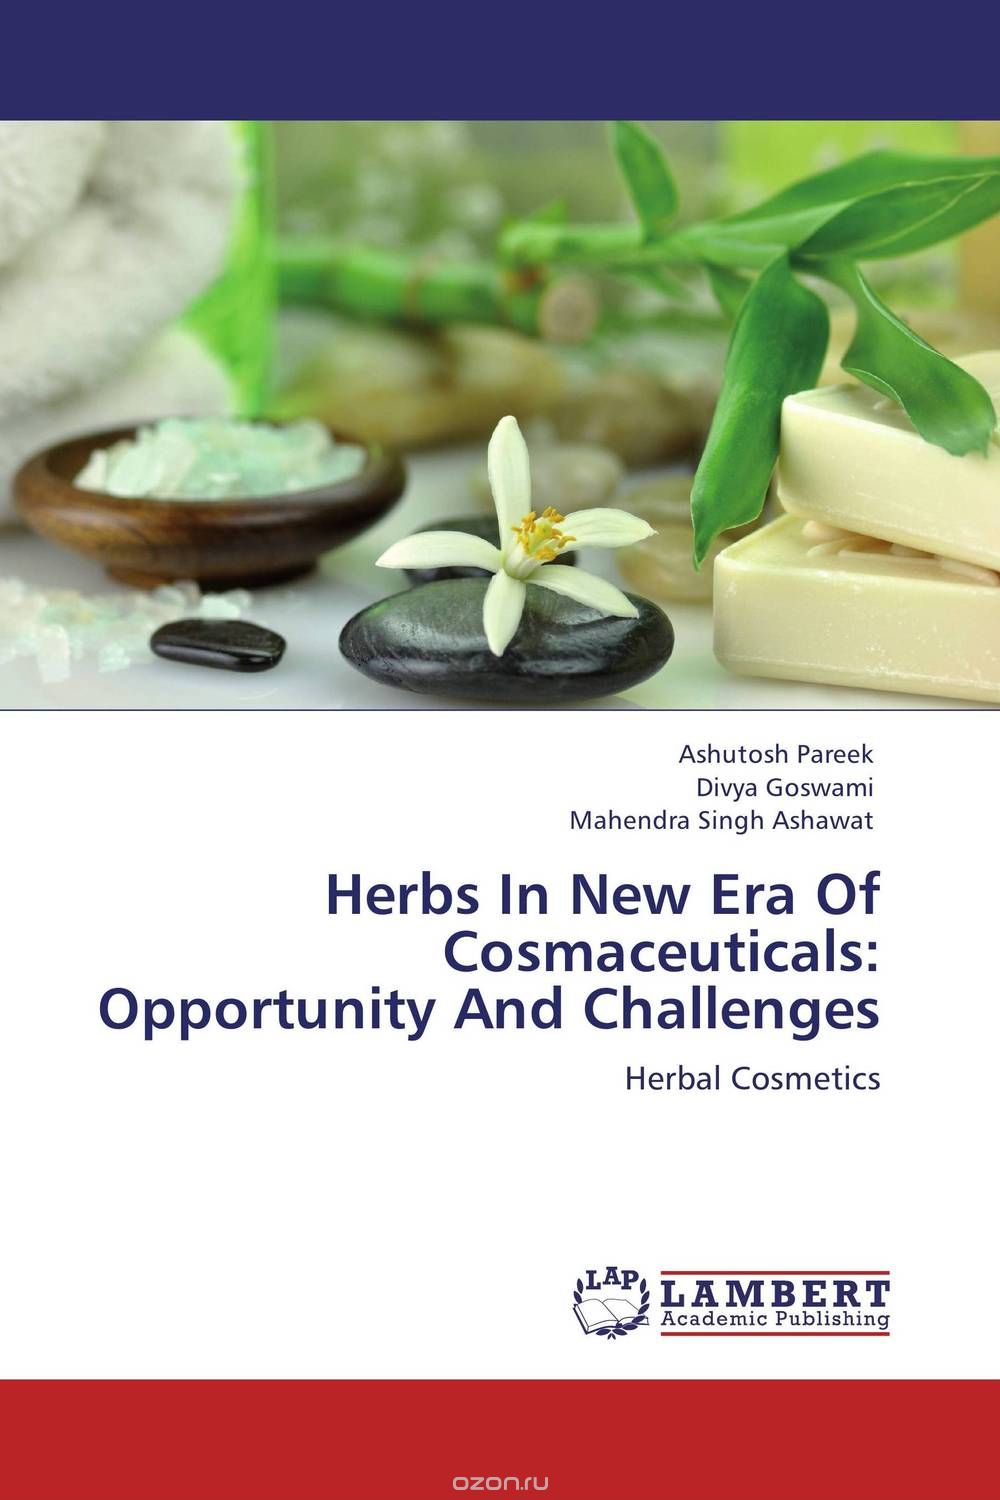 Herbs In New Era Of Cosmaceuticals: Opportunity And Challenges